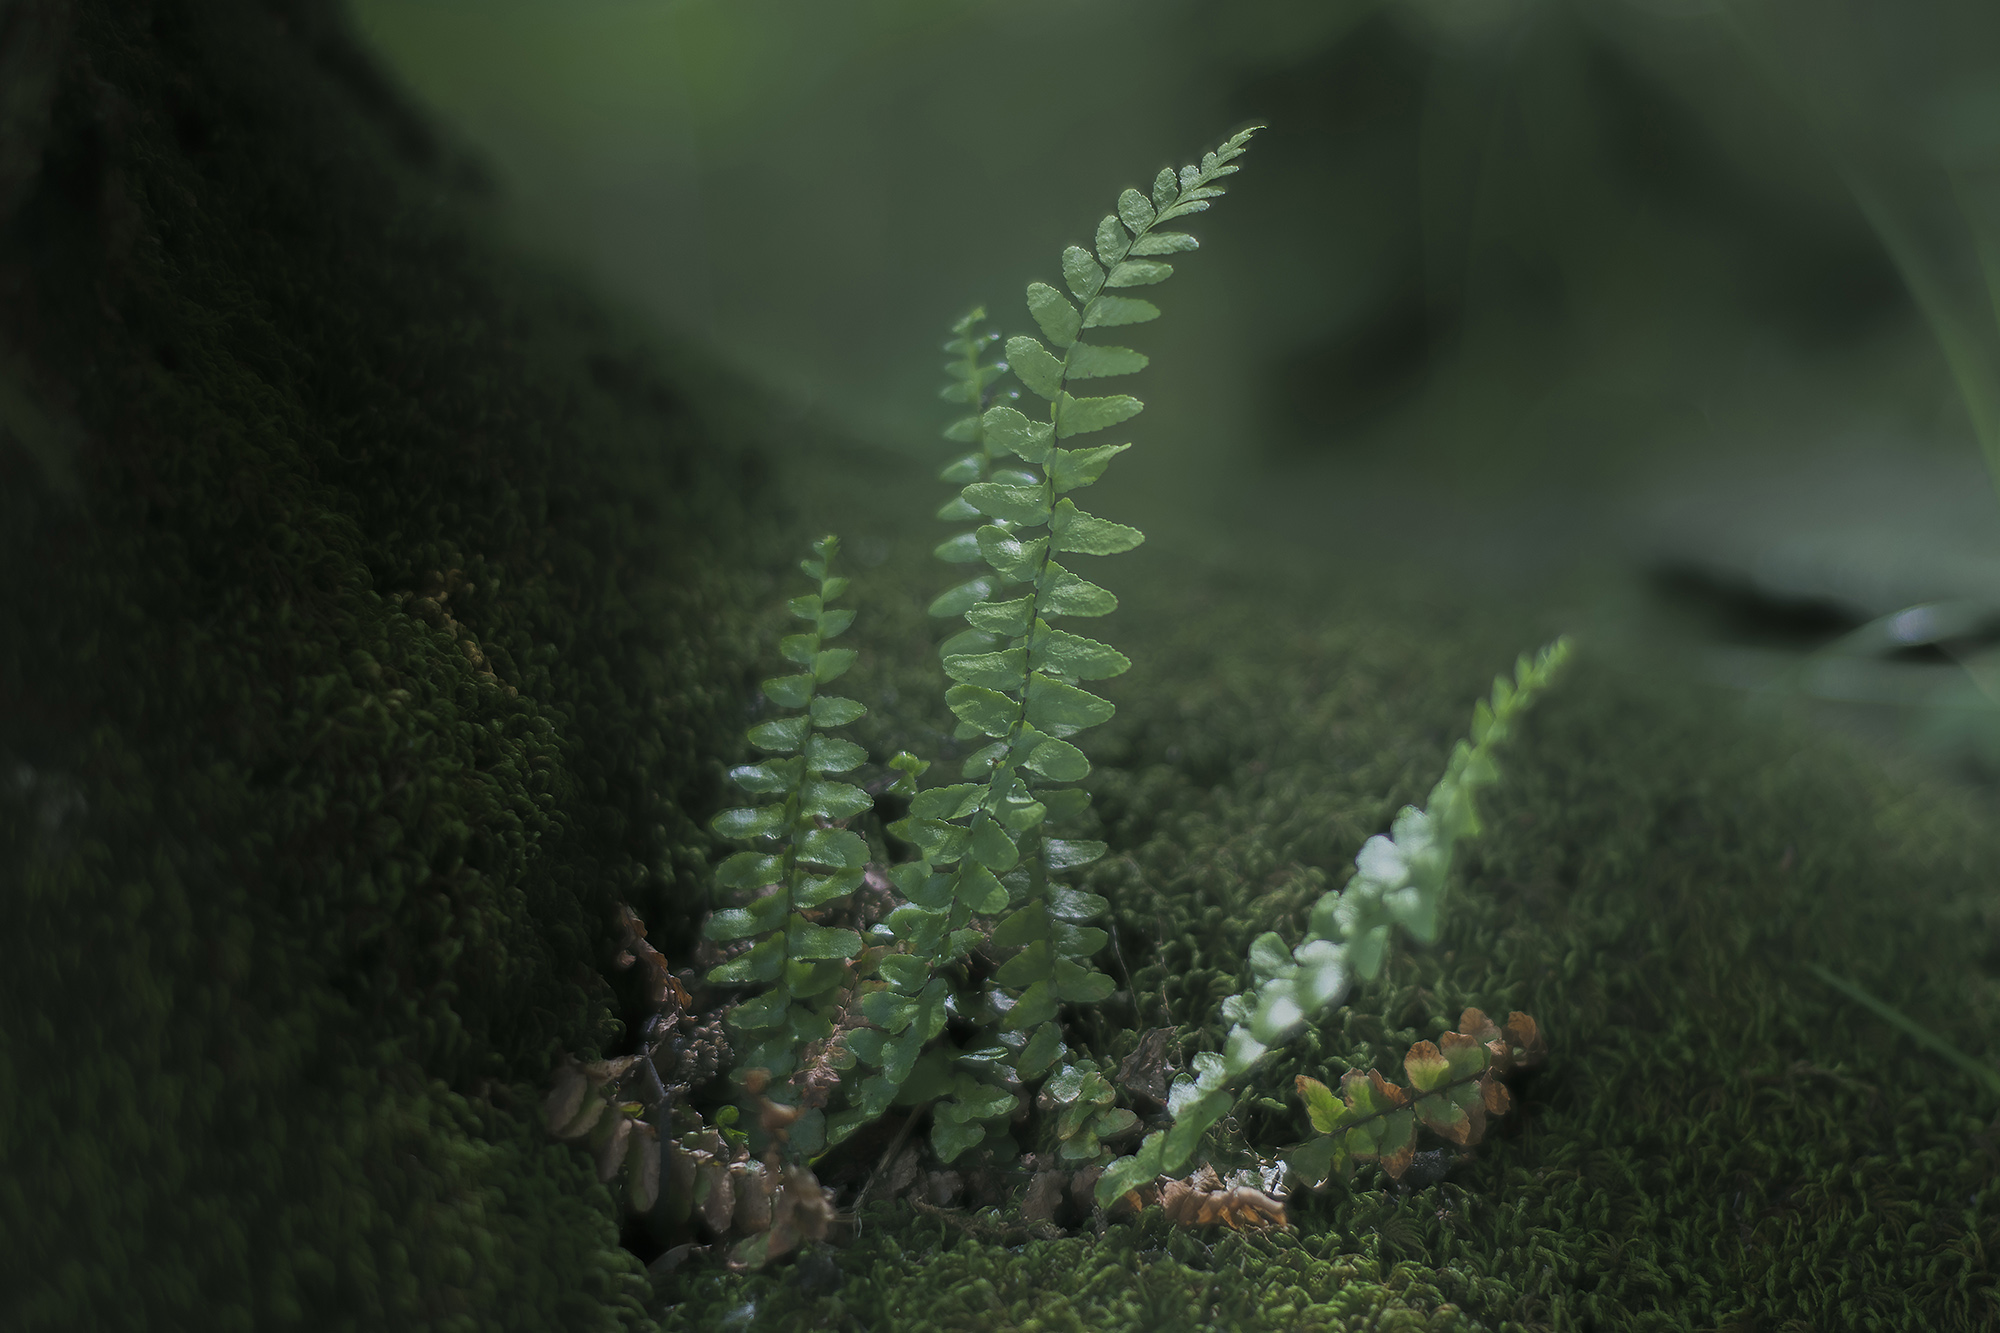 lush, emerald fern sprout growing on a tree trunk